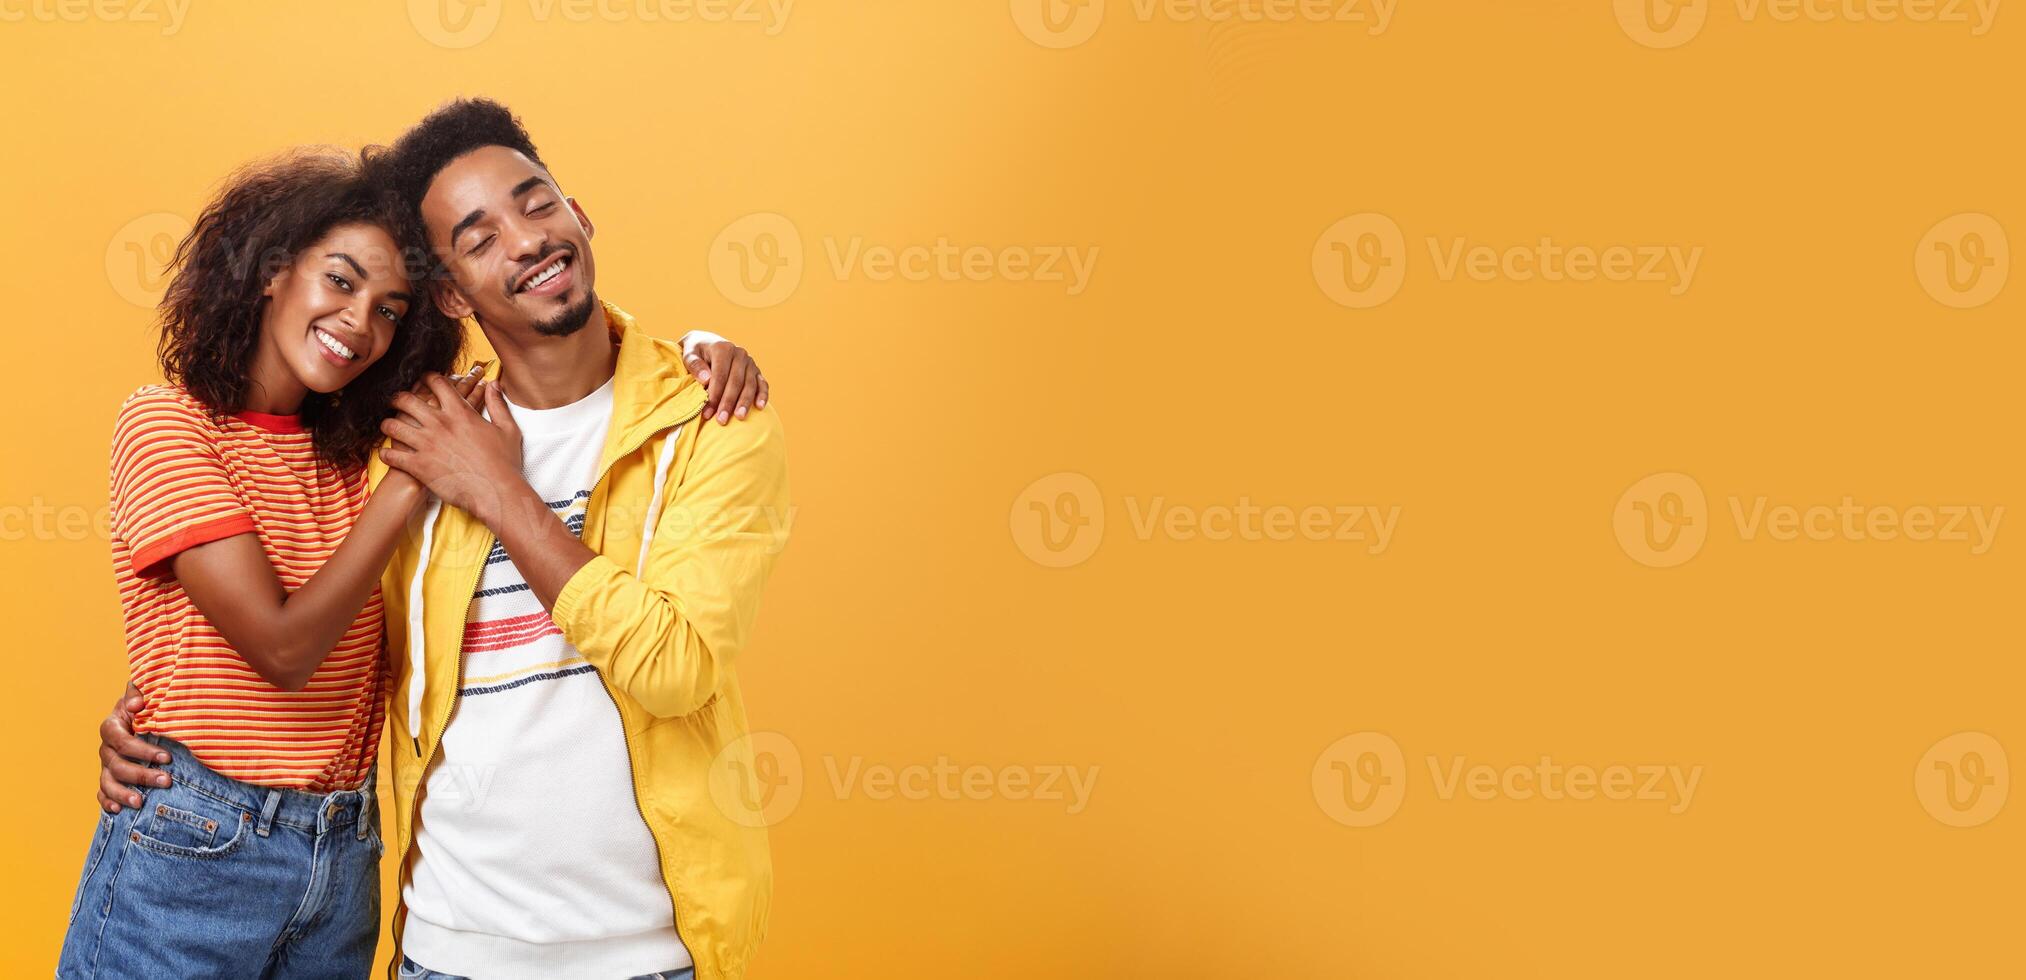 They love each other. Portrait of two charming african american man and woman in relationship hugging with heartwarming smile touching hands smiling gently posing against orange background photo